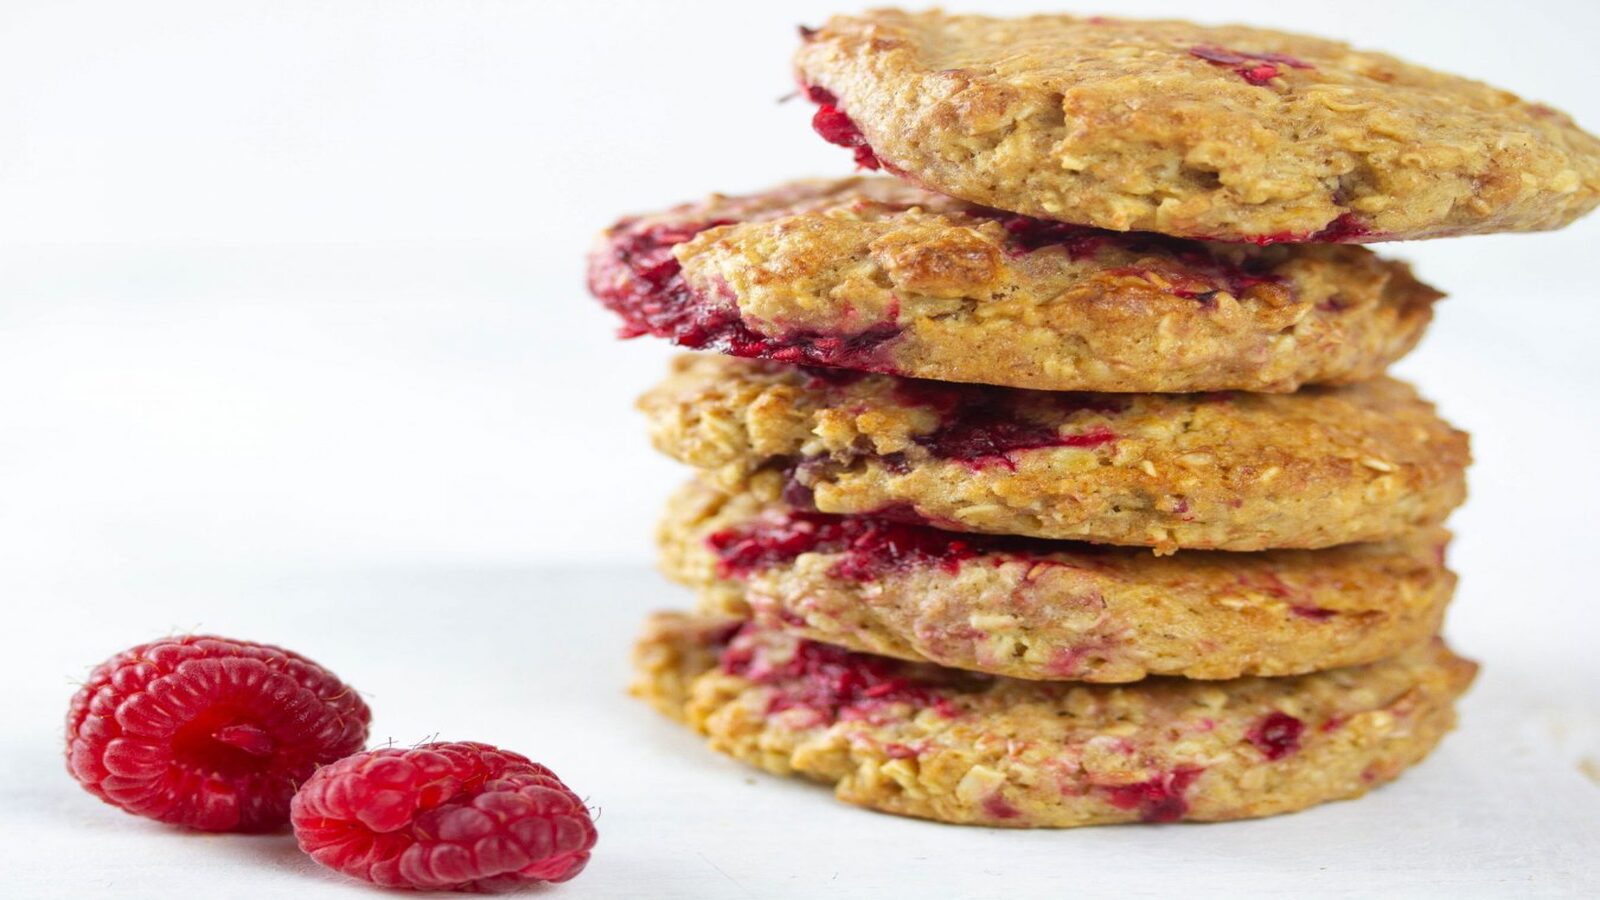 11-maxi-fruits-real-raspberry-oatmeal-cookies-nutrition-facts